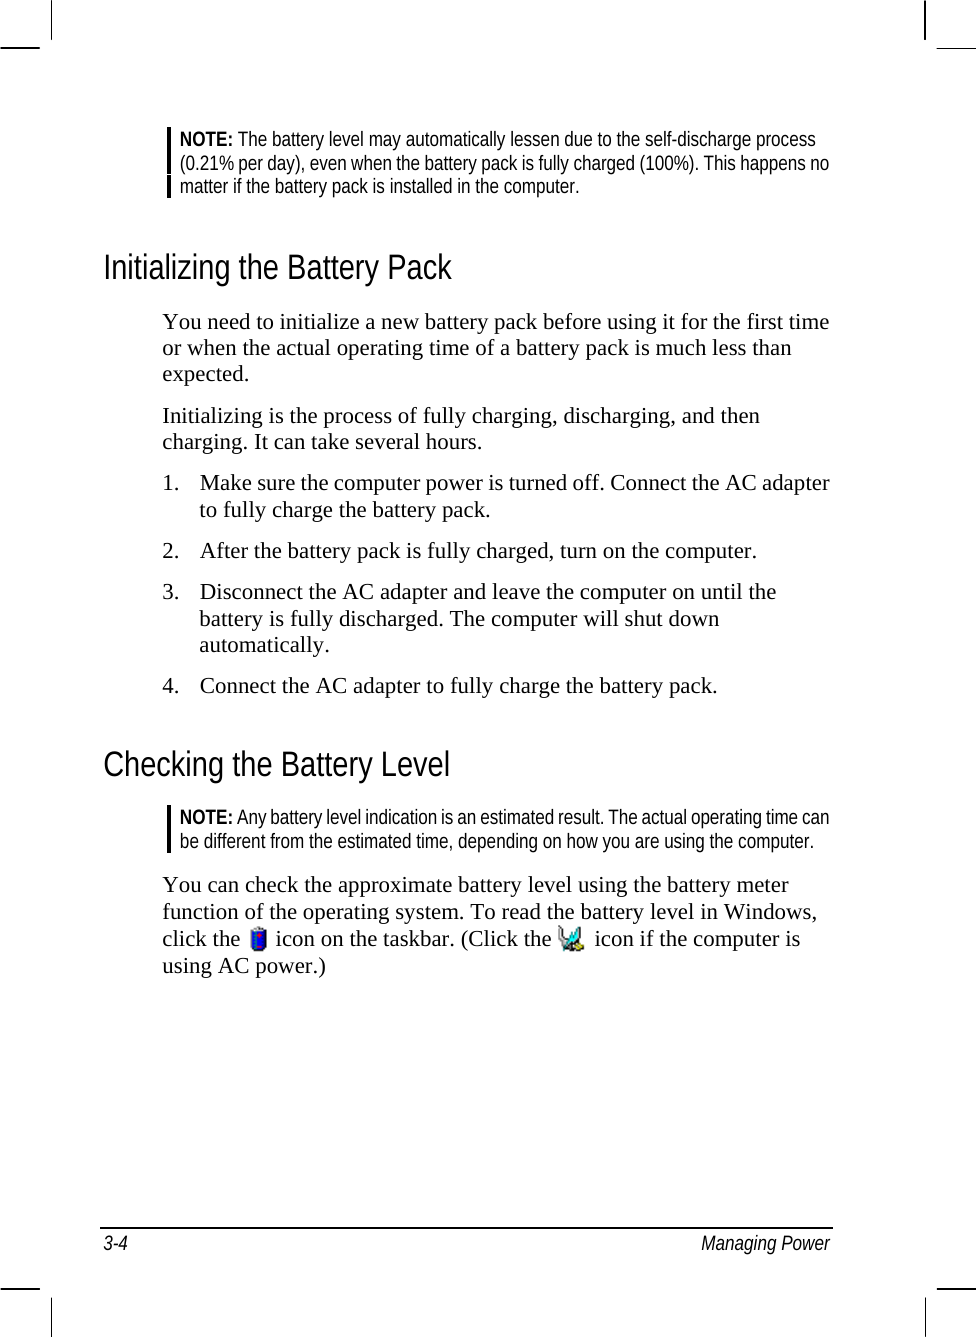  NOTE: The battery level may automatically lessen due to the self-discharge process (0.21% per day), even when the battery pack is fully charged (100%). This happens no matter if the battery pack is installed in the computer.  Initializing the Battery Pack You need to initialize a new battery pack before using it for the first time or when the actual operating time of a battery pack is much less than expected. Initializing is the process of fully charging, discharging, and then charging. It can take several hours. 1. Make sure the computer power is turned off. Connect the AC adapter to fully charge the battery pack. 2. After the battery pack is fully charged, turn on the computer. 3. Disconnect the AC adapter and leave the computer on until the battery is fully discharged. The computer will shut down automatically. 4. Connect the AC adapter to fully charge the battery pack. Checking the Battery Level NOTE: Any battery level indication is an estimated result. The actual operating time can be different from the estimated time, depending on how you are using the computer.  You can check the approximate battery level using the battery meter function of the operating system. To read the battery level in Windows, click the   icon on the taskbar. (Click the   icon if the computer is using AC power.)   3-4 Managing Power 